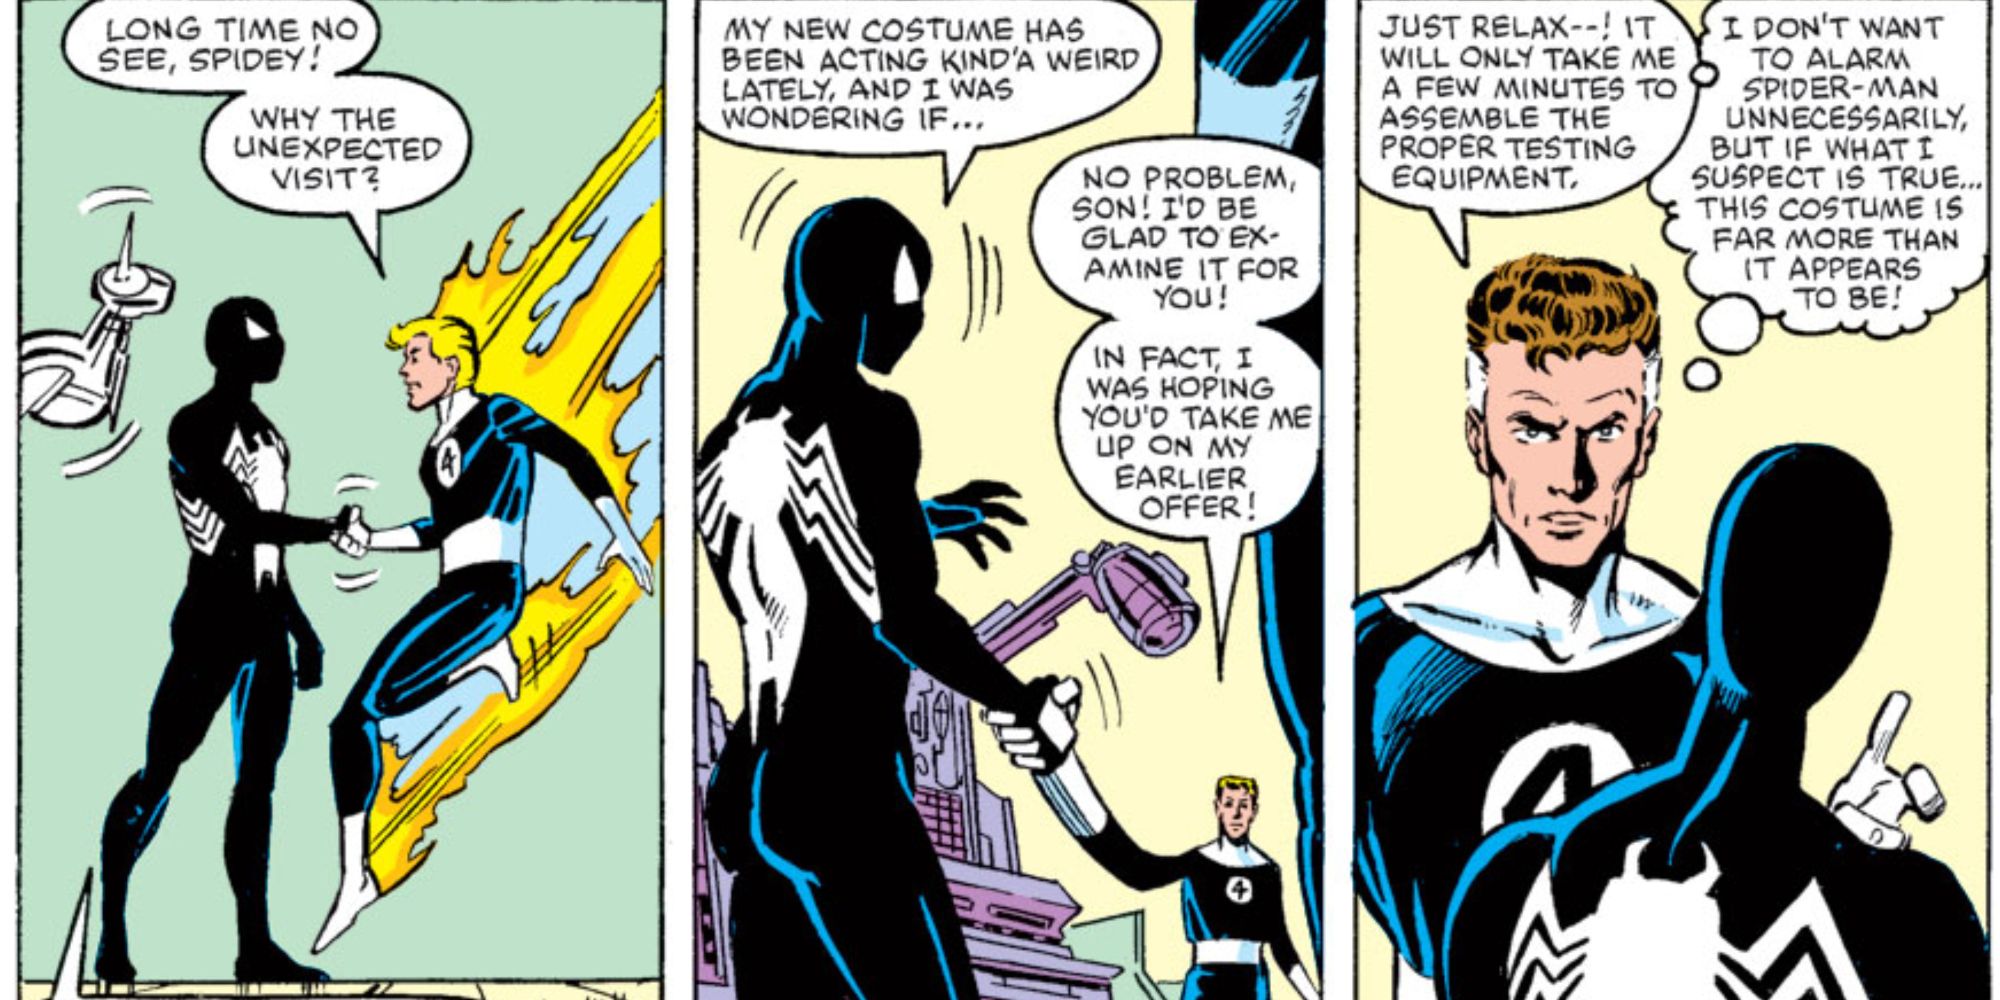 Spider-Man goes to the Fantastic Four for help with his black costume in Marvel Comics.